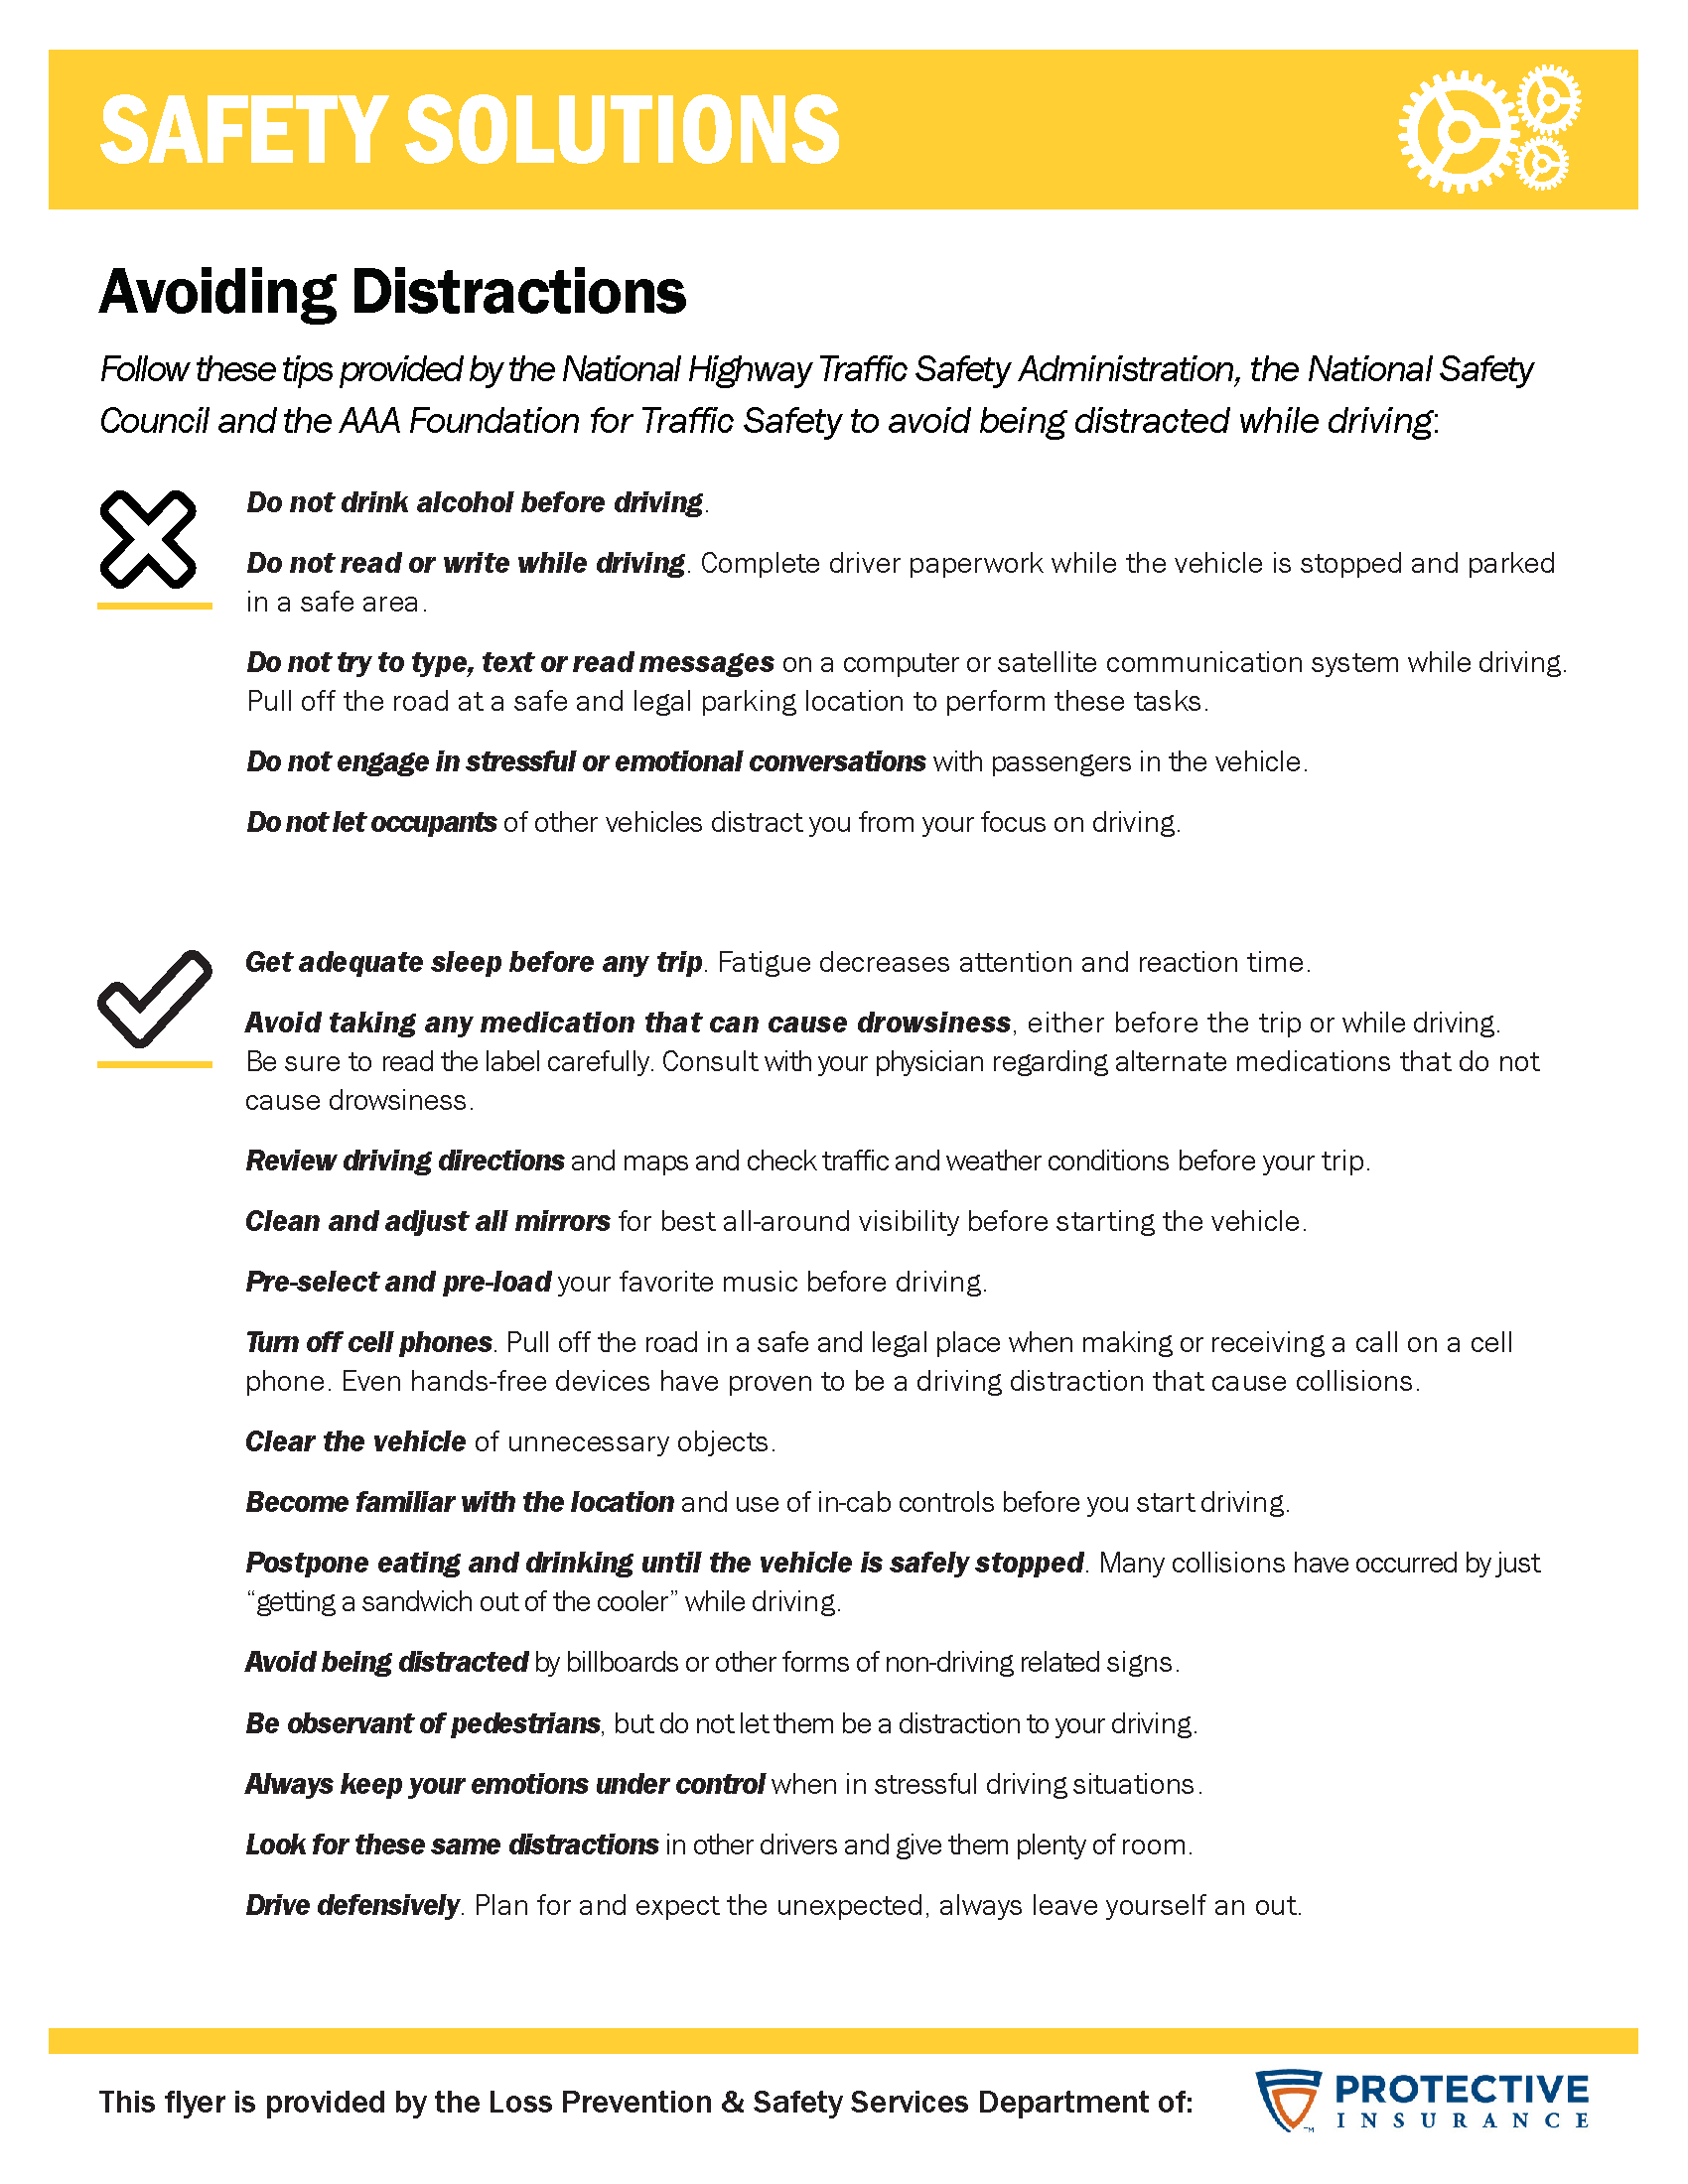 avoid distractions work from home